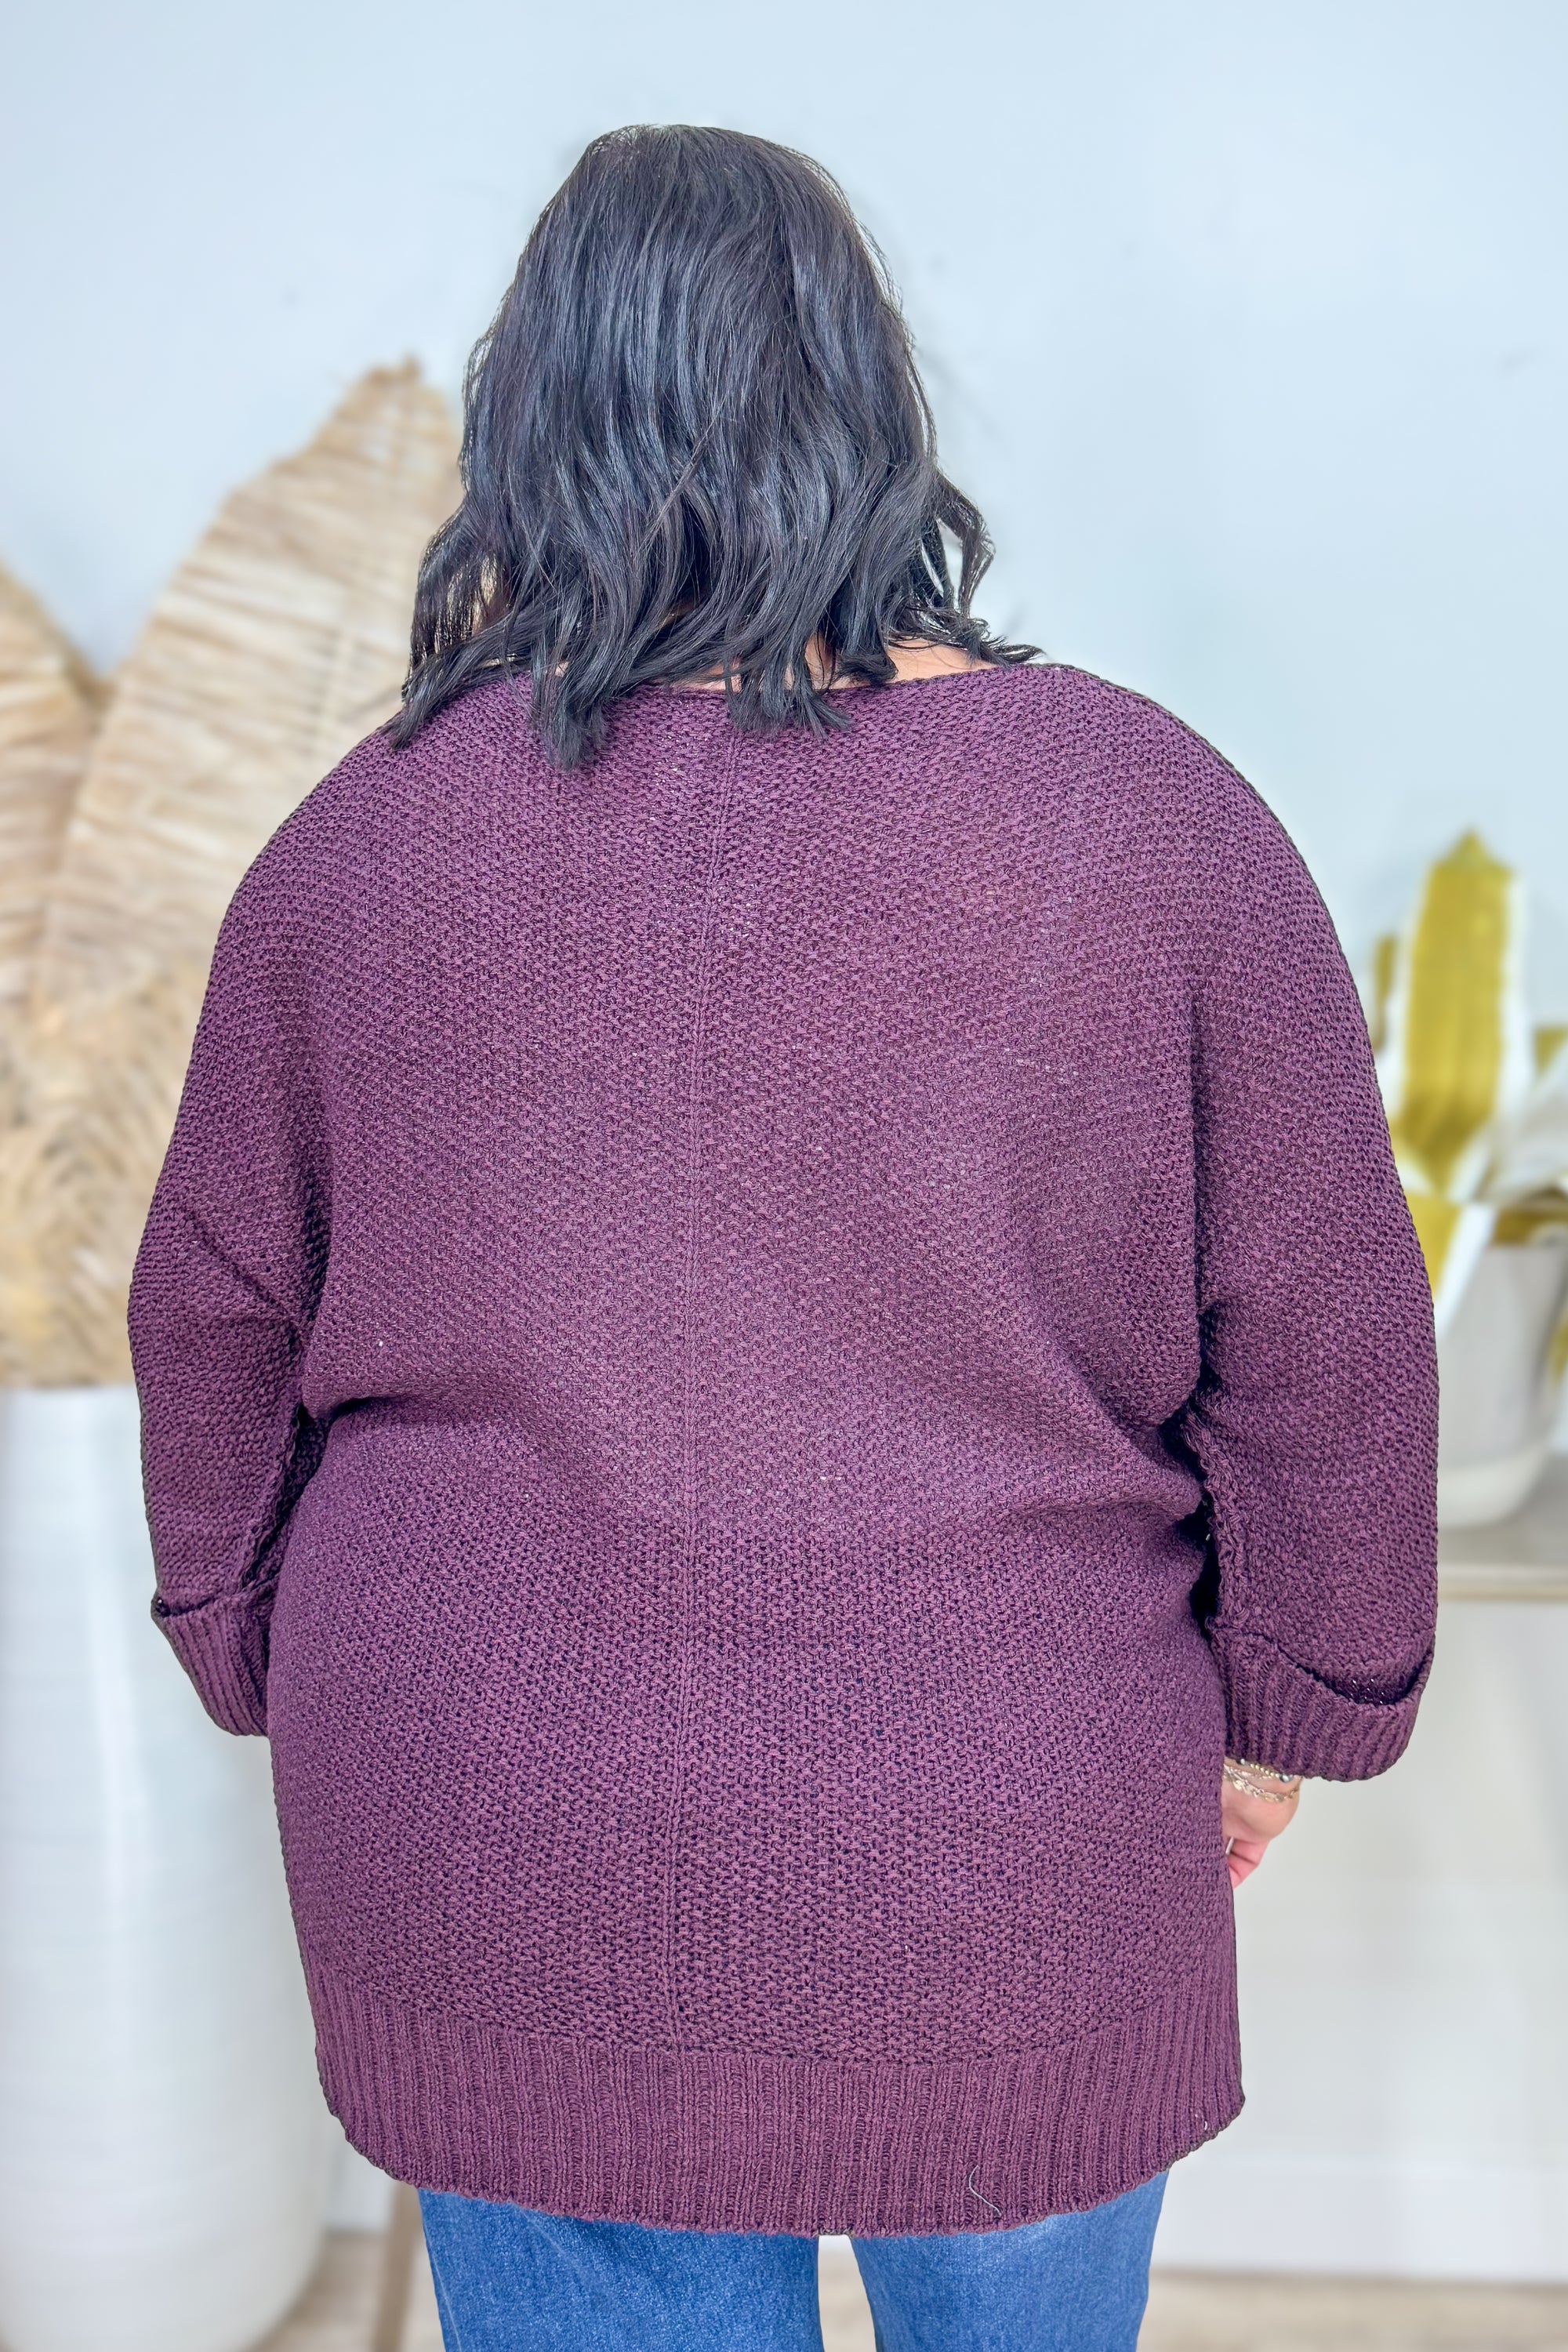 Red Bean Crew Neck Knit Sweater